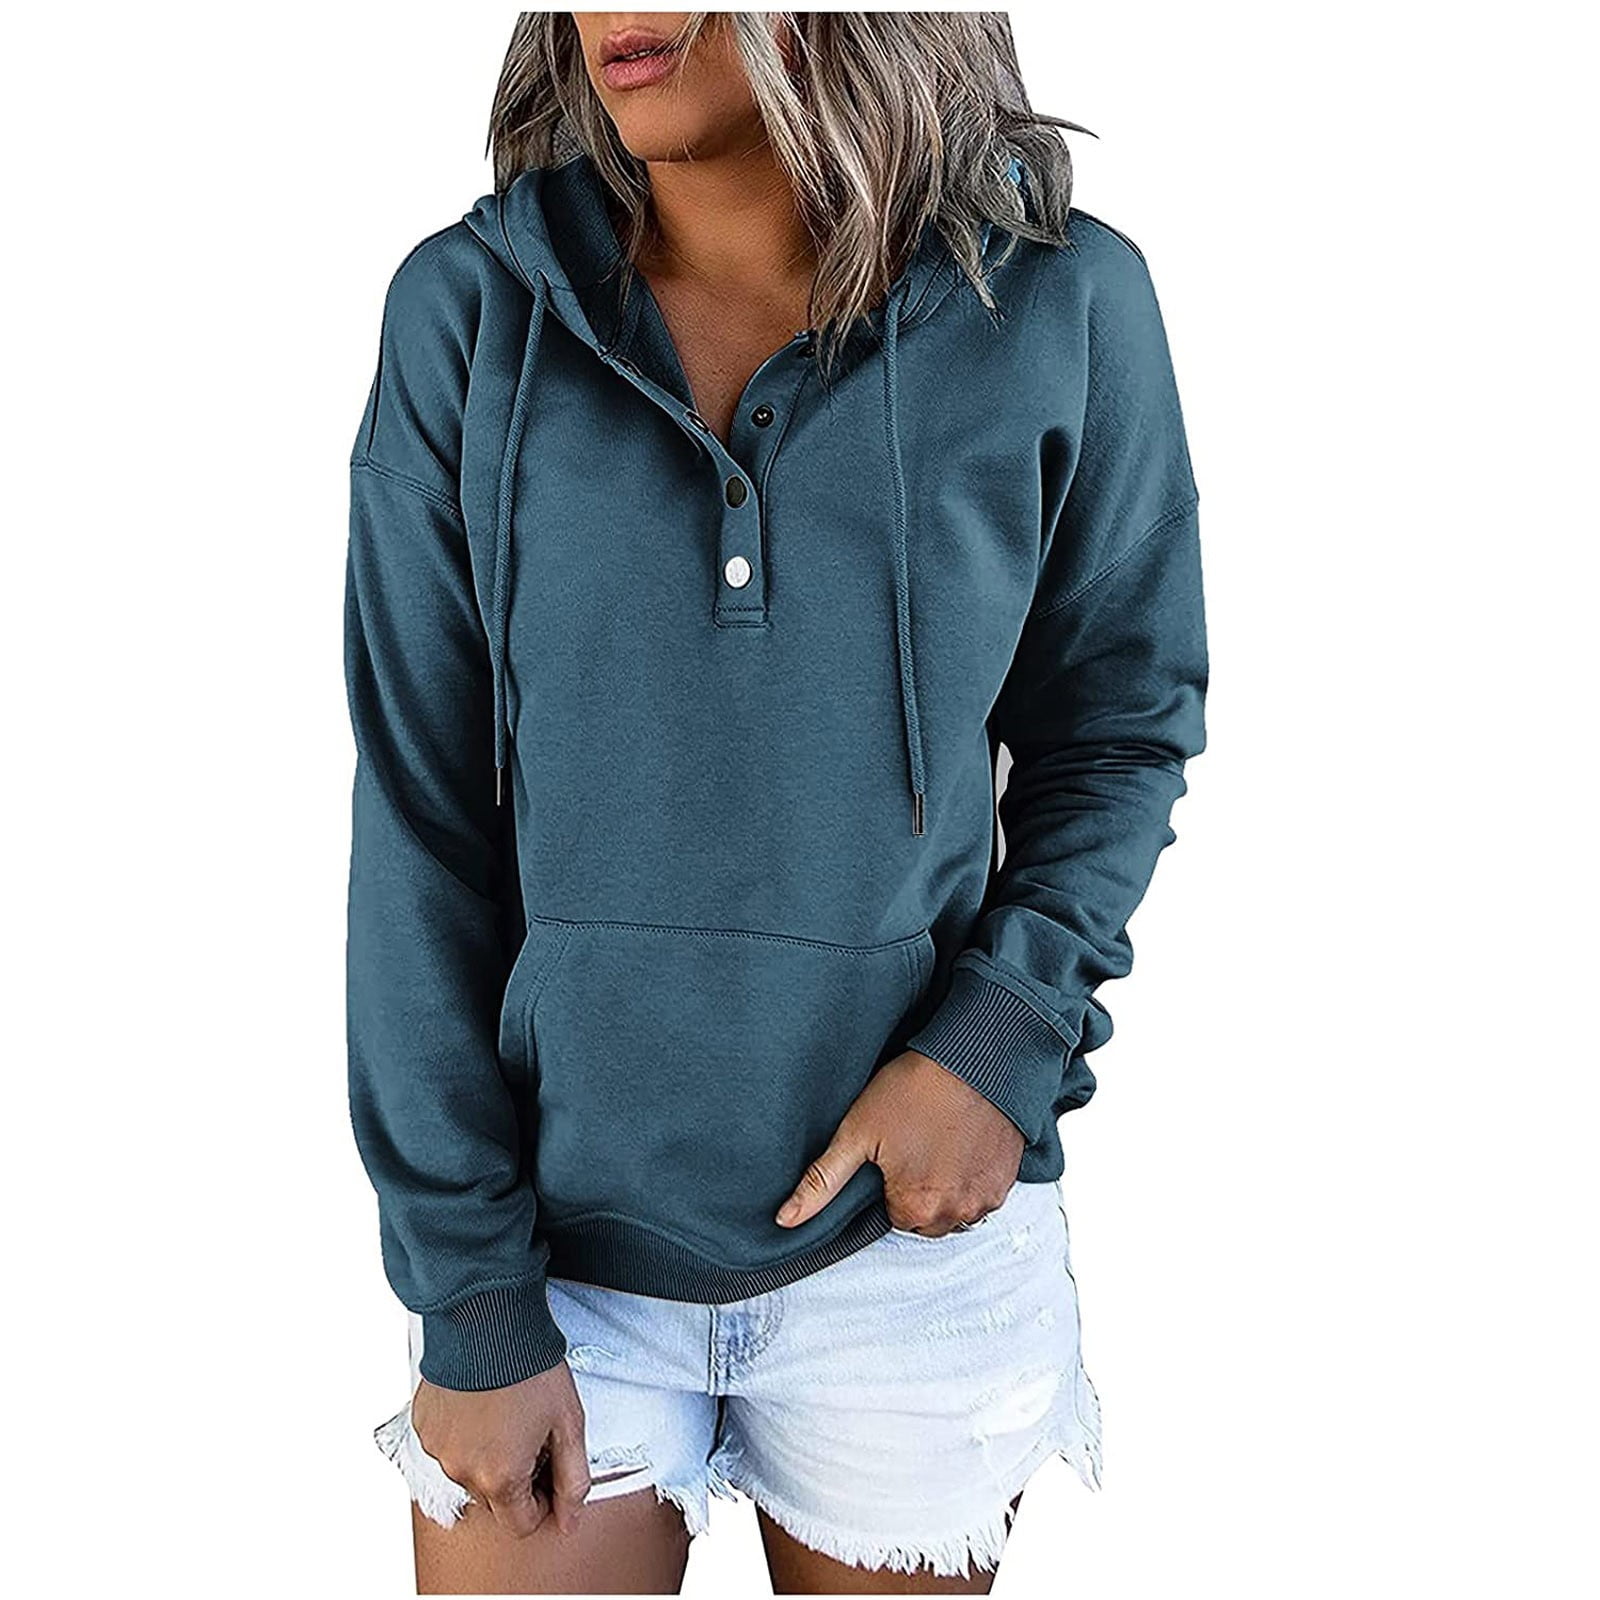 Aukbays Graphic Hoodies for Women,Women's Long Sleeve Shirt Casual Graphic Tee Shirt Fall Clothes for Women Tops Blouses 